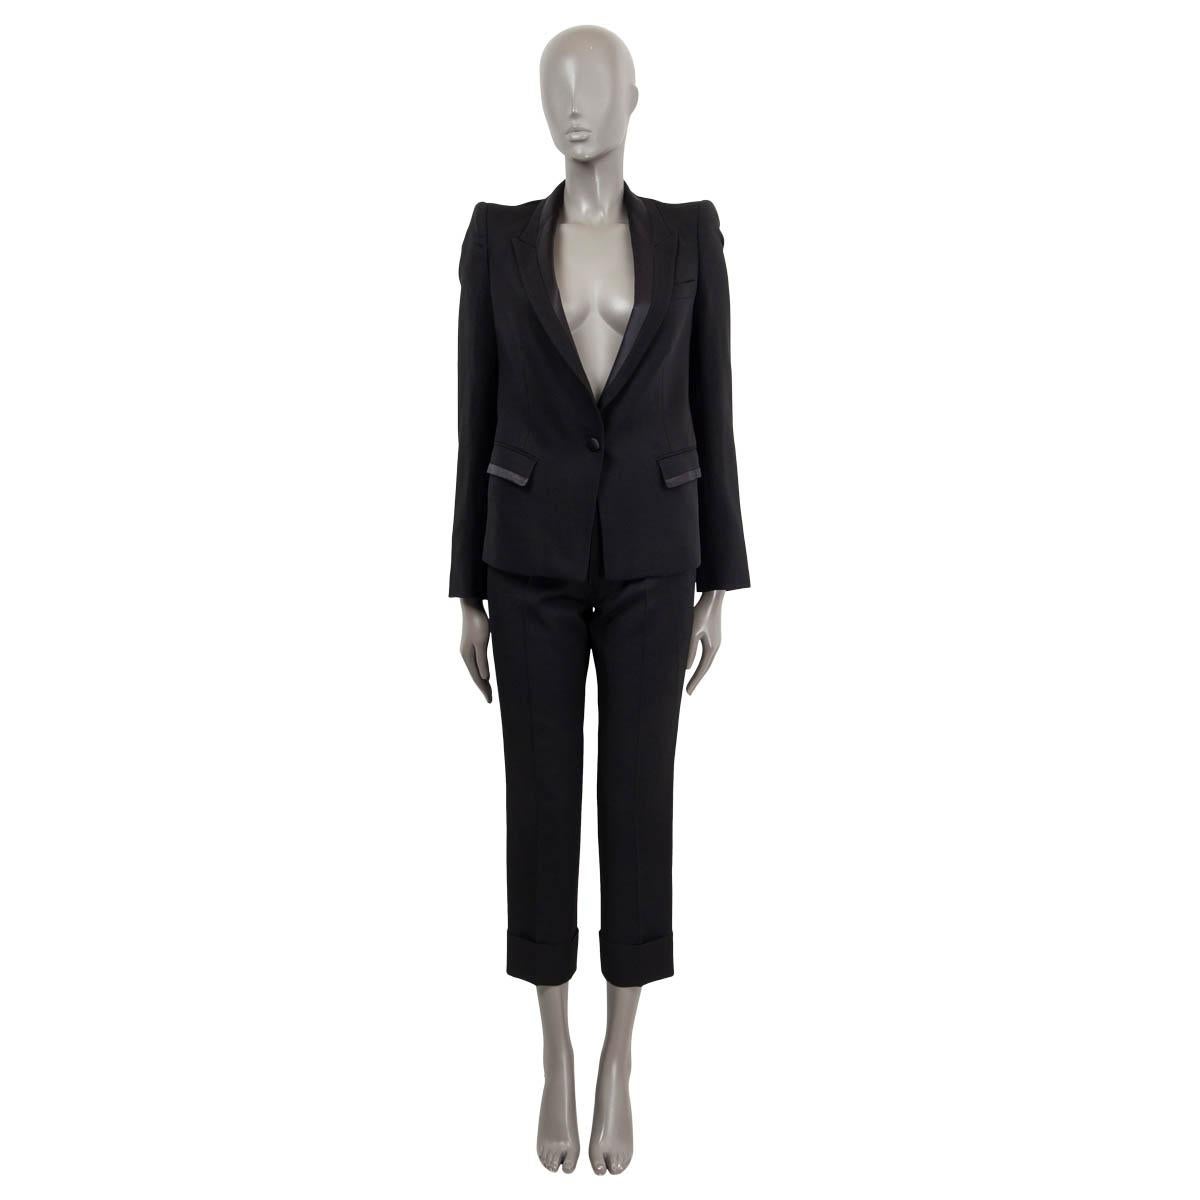 100% authentic Roberto Cavalli satin trim single button peak collar blazer in black wool (98%) and elastane (2%). Features two flap pockets on the front and one chest pocket. Lined in black satin (100%). Has been worn and is in excellent